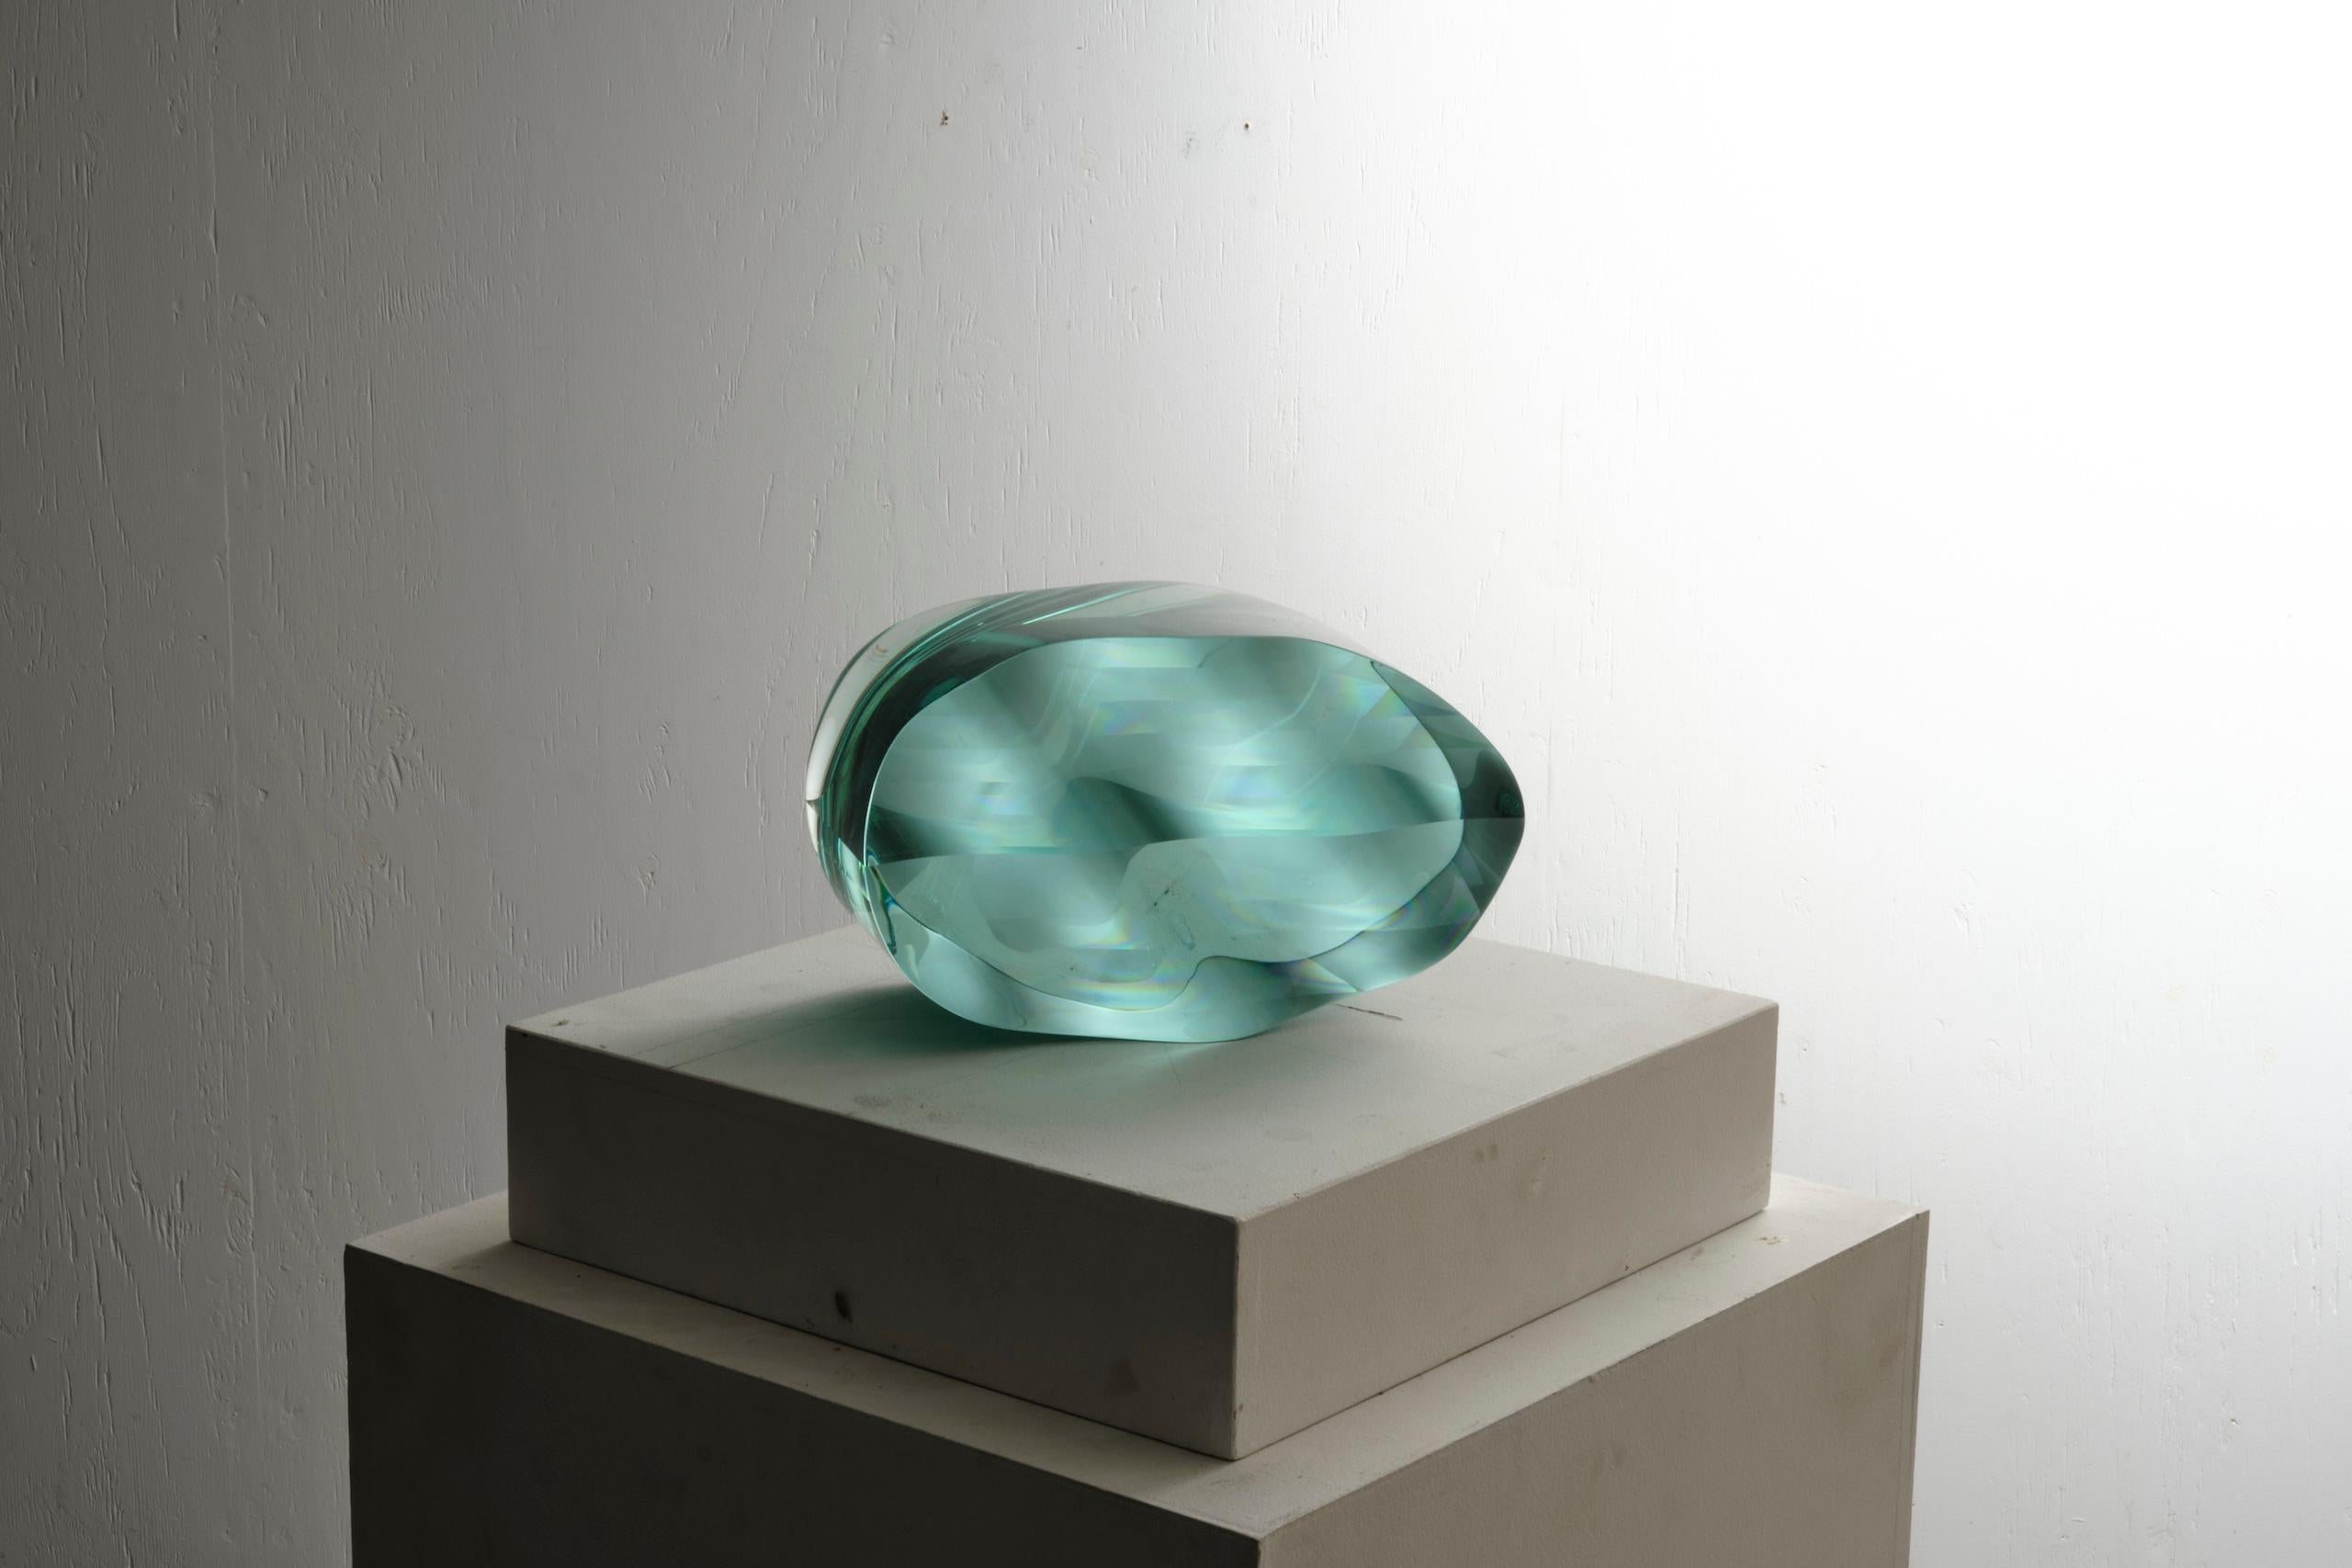 F.230101 by Toshio Iezumi - Contemporary glass sculpture, green, abstract For Sale 9